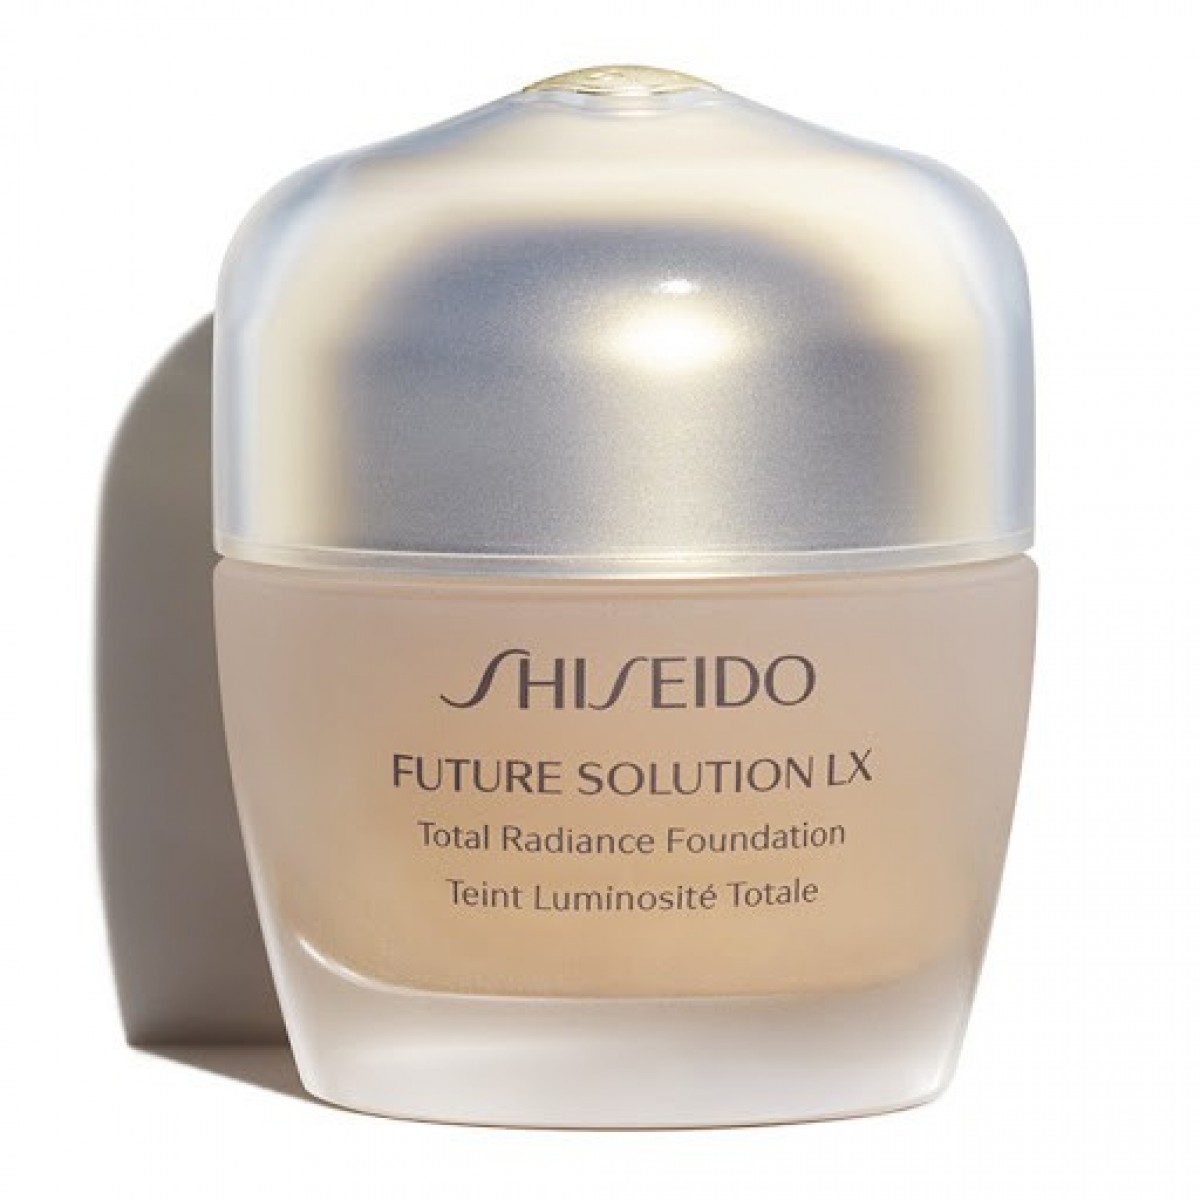 Future Solution LX Total Radiance Foundation SPF 20